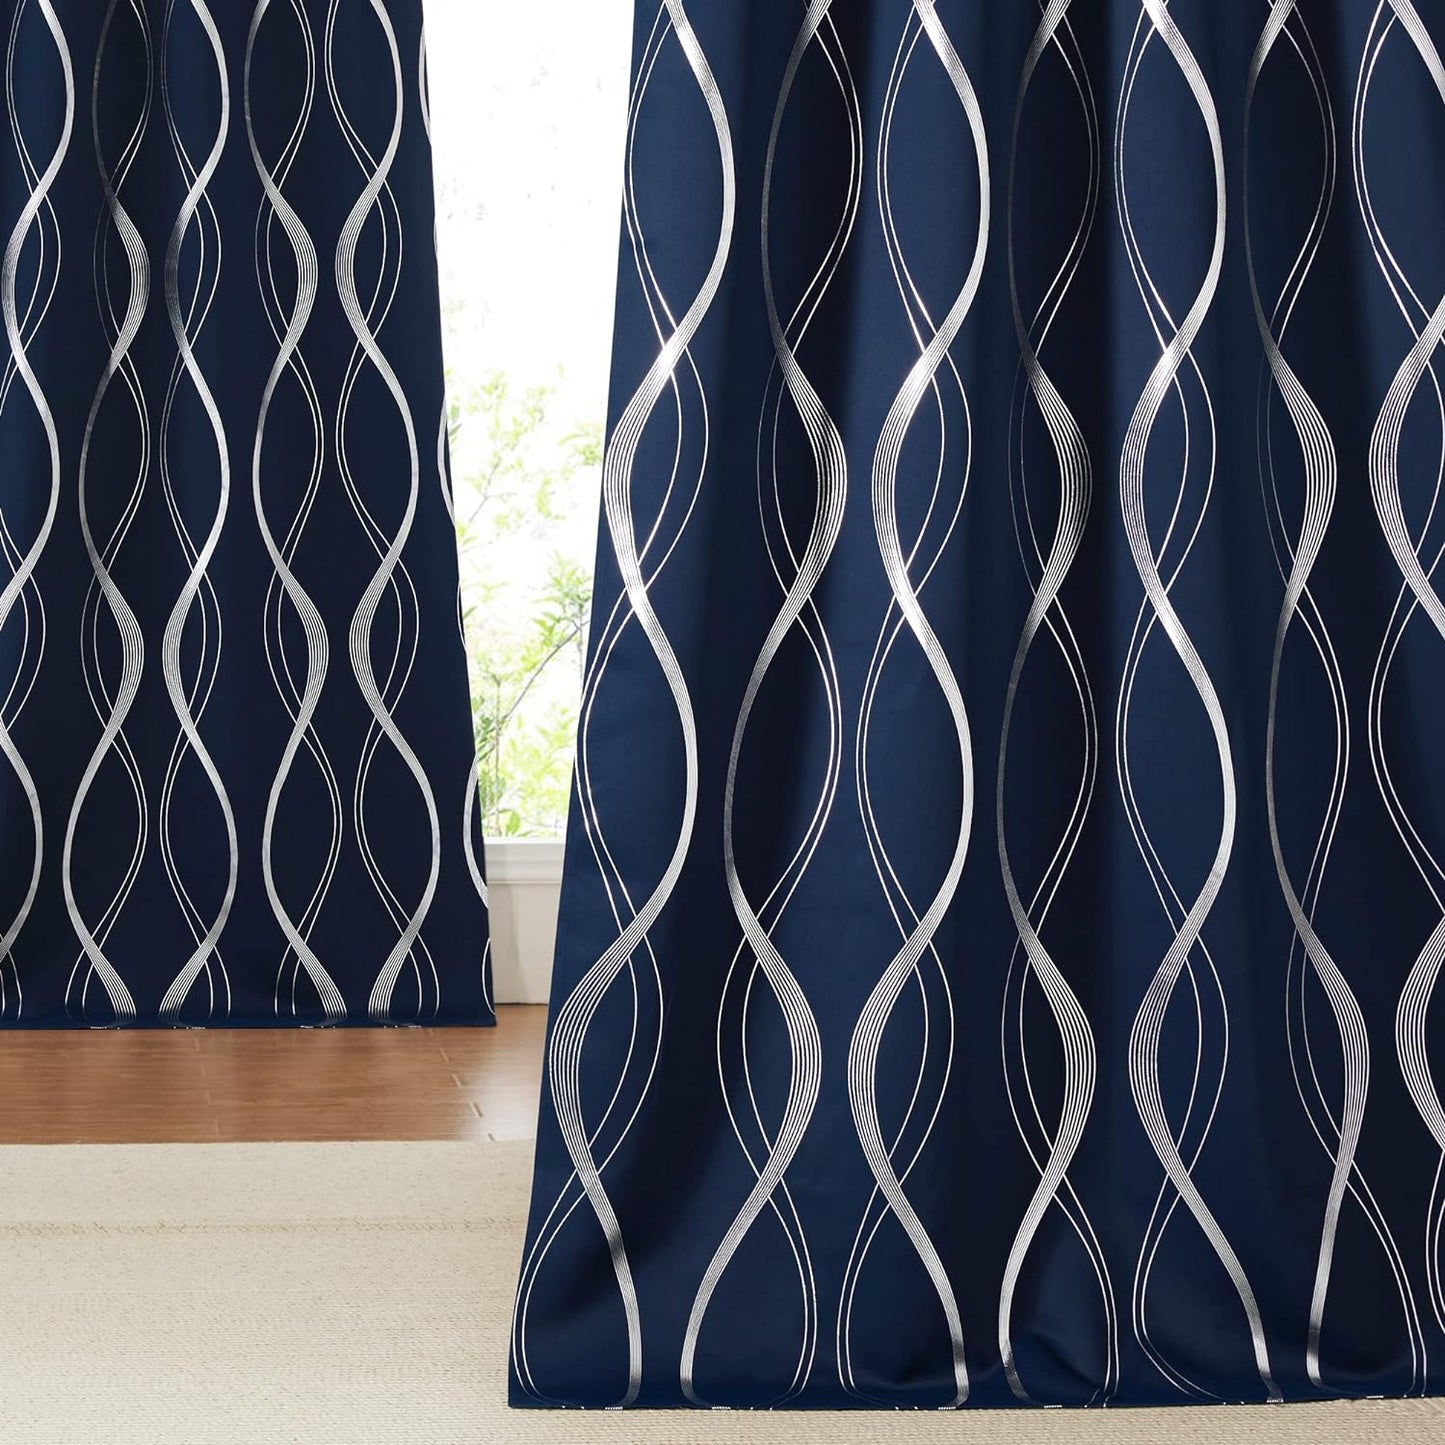 NICETOWN Grey Blackout Curtains 84 Inch Length 2 Panels Set for Bedroom/Living Room, Noise Reducing Thermal Insulated Wave Line Foil Print Drapes for Patio Sliding Glass Door (52 X 84, Gray)  NICETOWN Navy 42"W X 84"L 